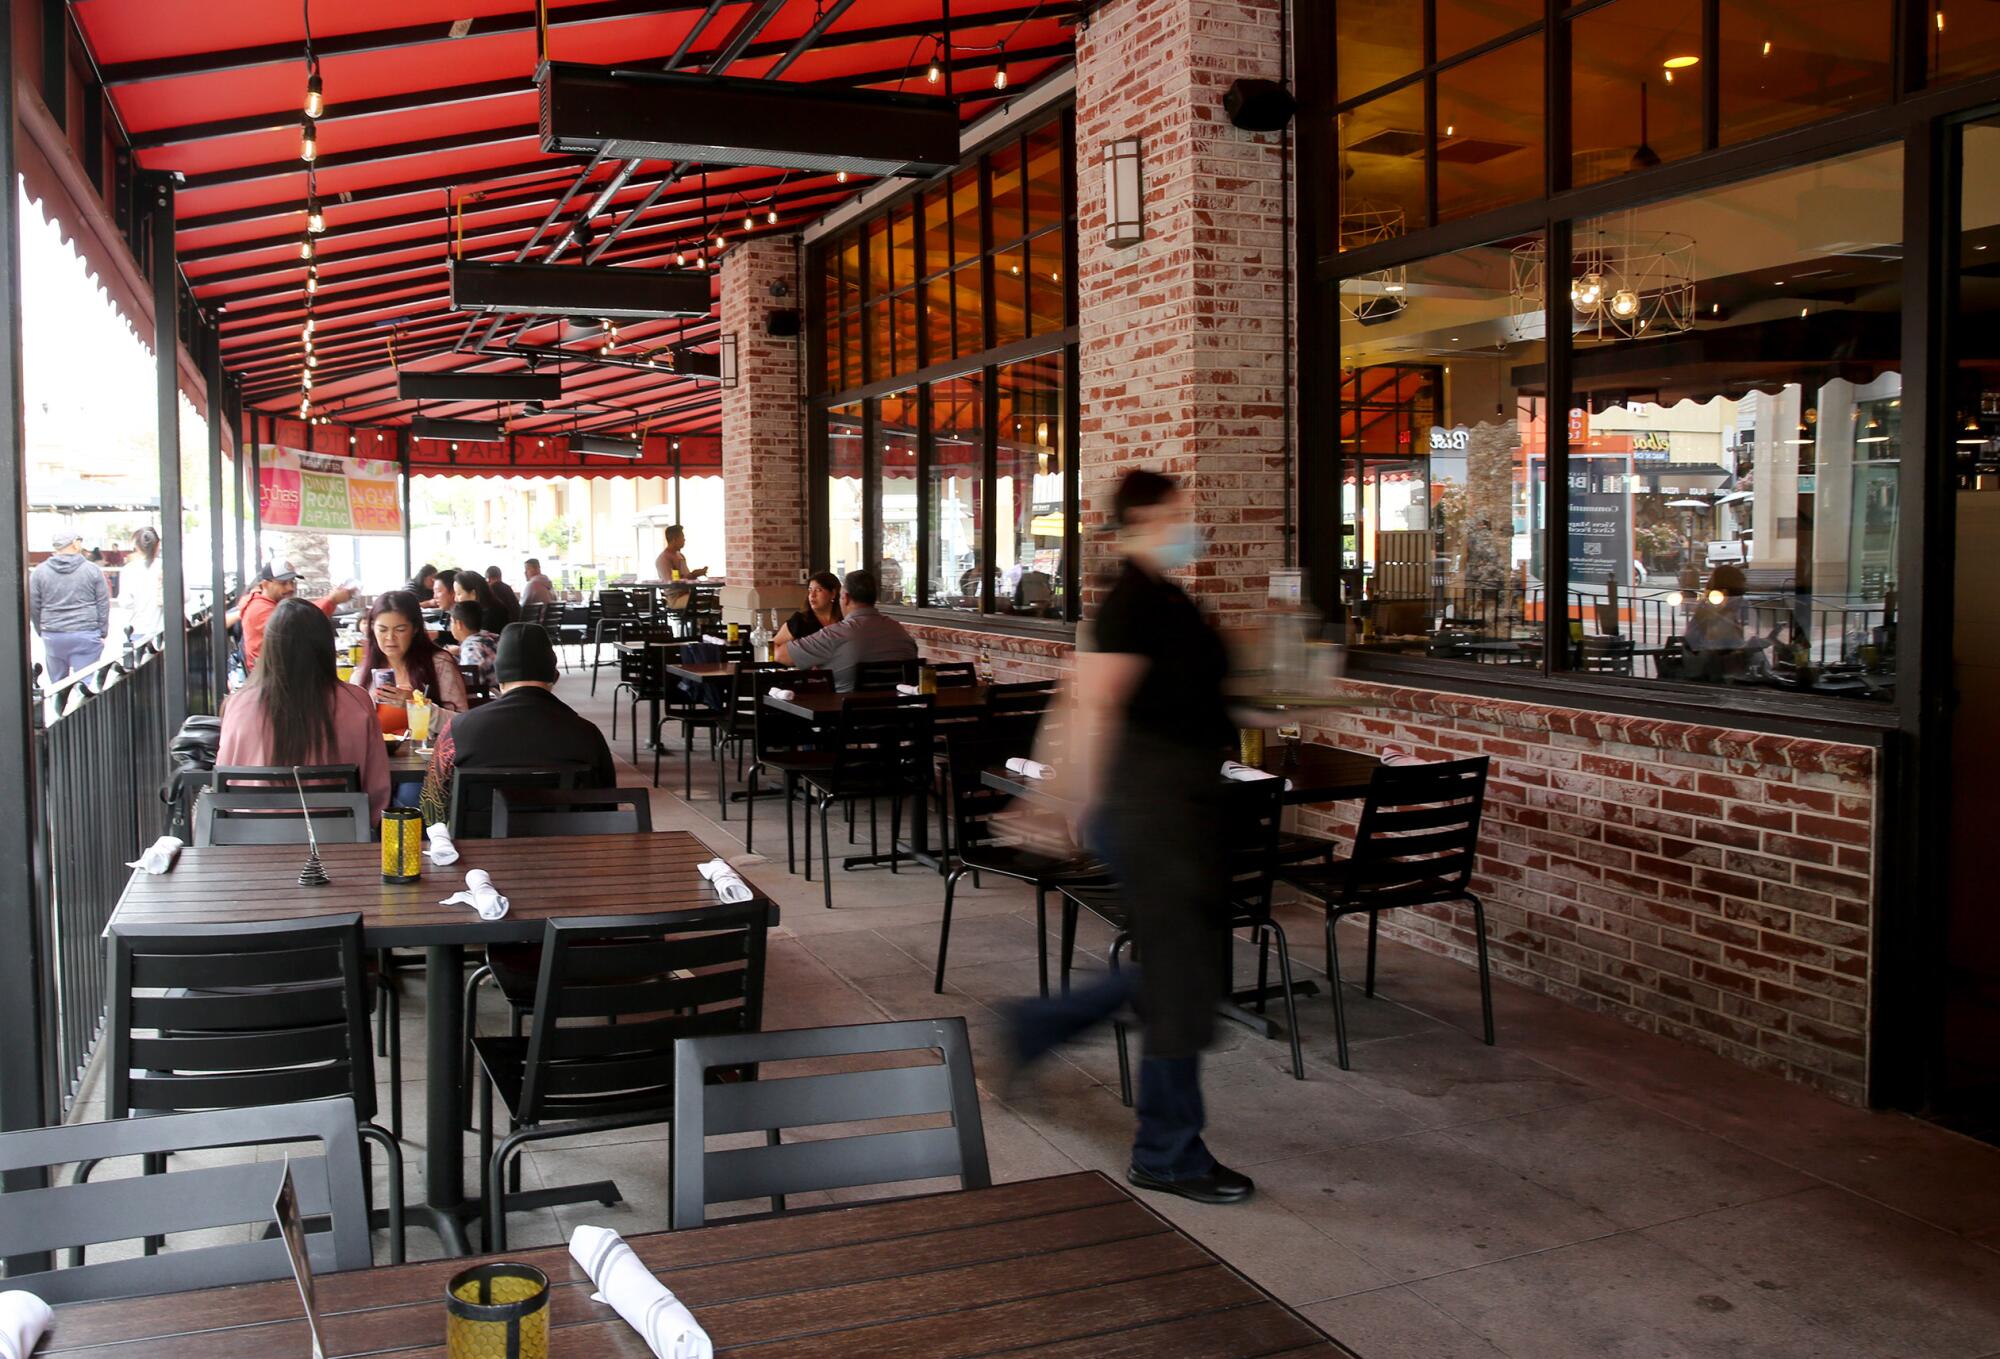 One of the large outdoor dining areas at Cha Cha's Latin Kitchen.